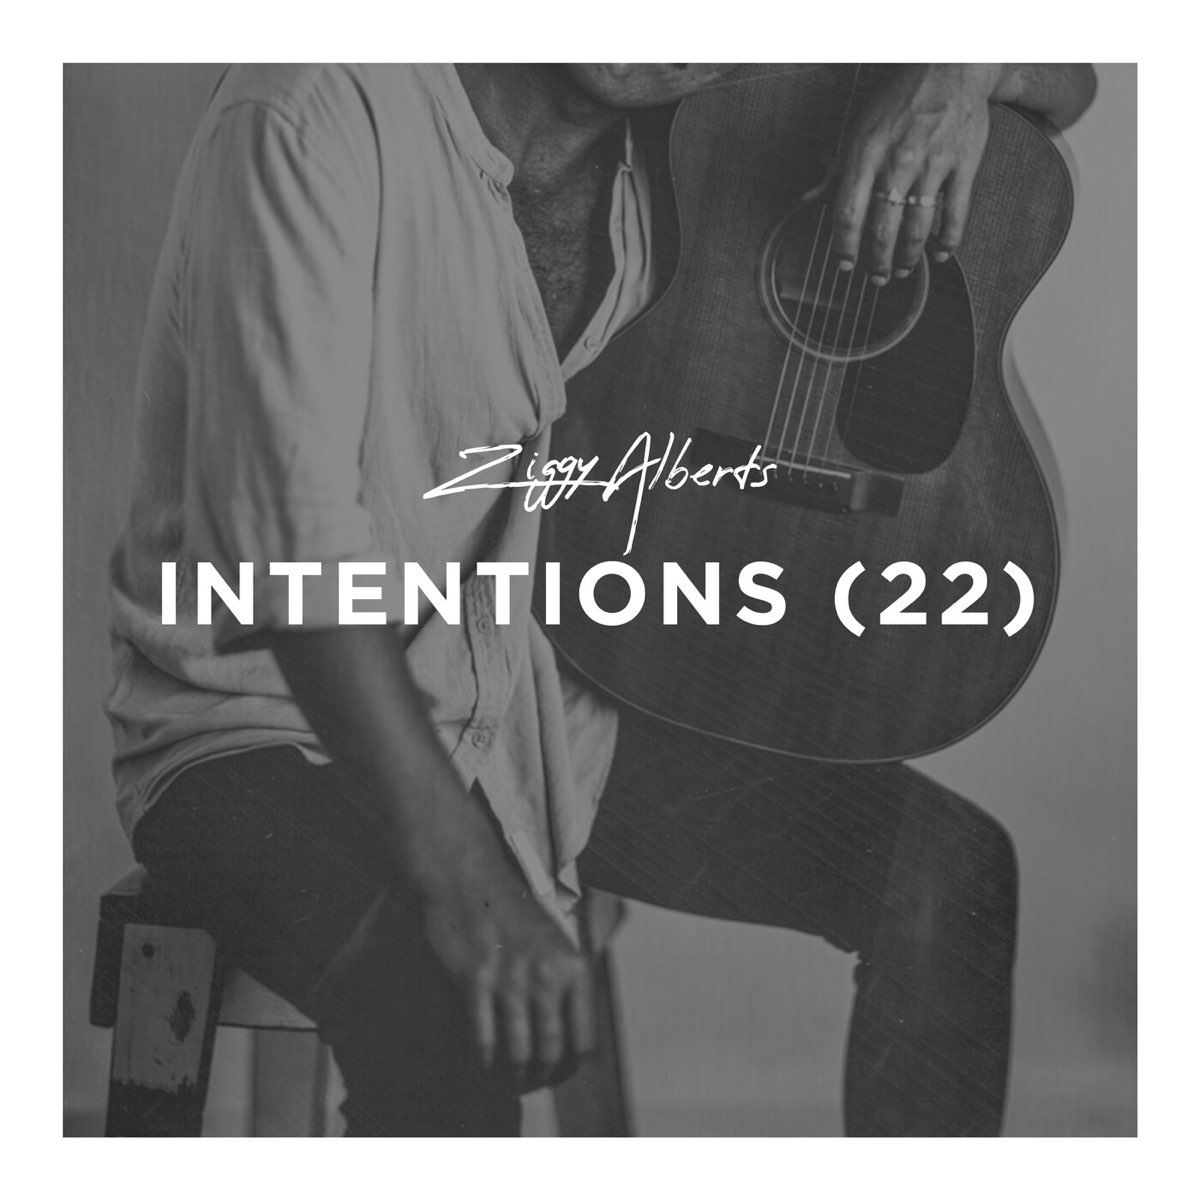 Singles 22. Intentions. Searching for Freedom альбом. Searching for Freedom (Ziggy Alberts album). Heartbeat Ziggy Alberts.